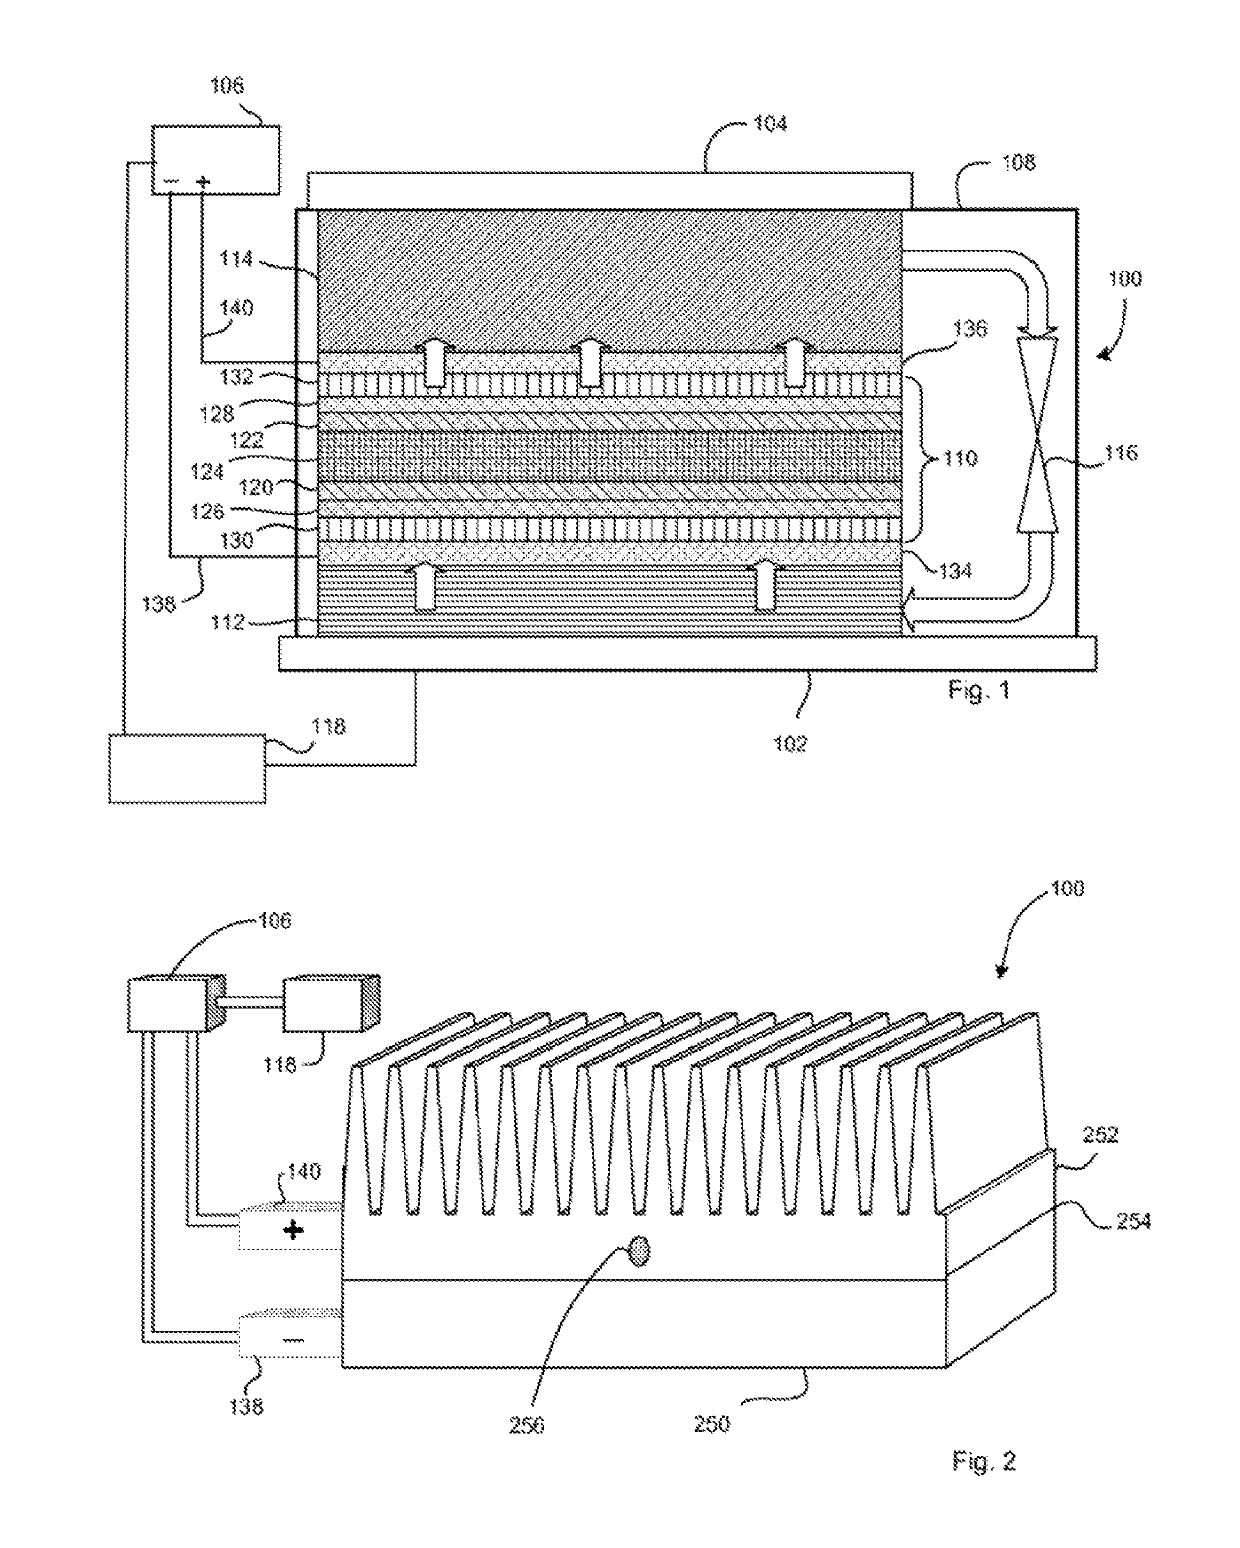 Advanced system for electrochemical cell